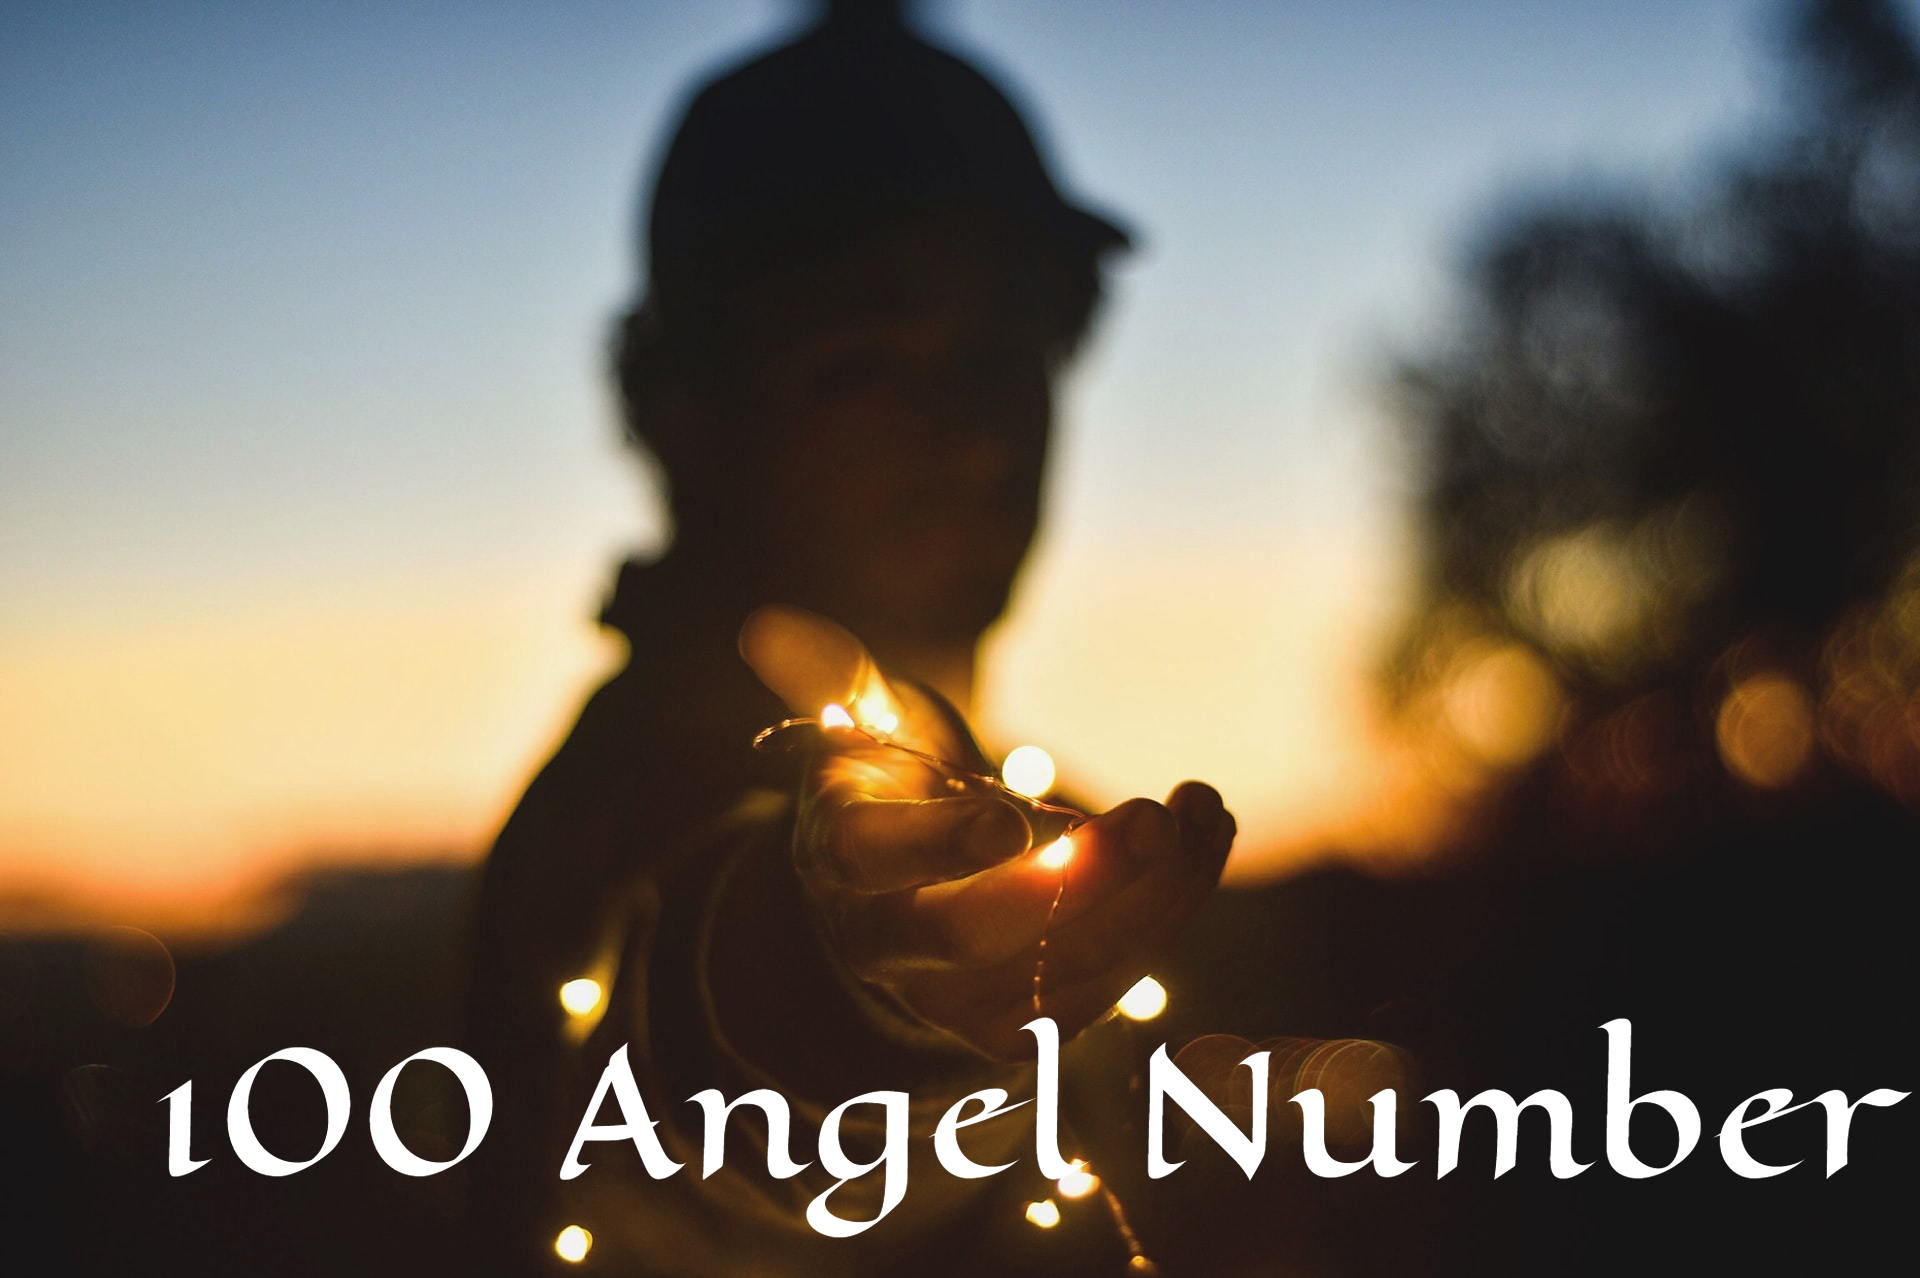 100 Angel Number - A Sign Of Divine Guidance